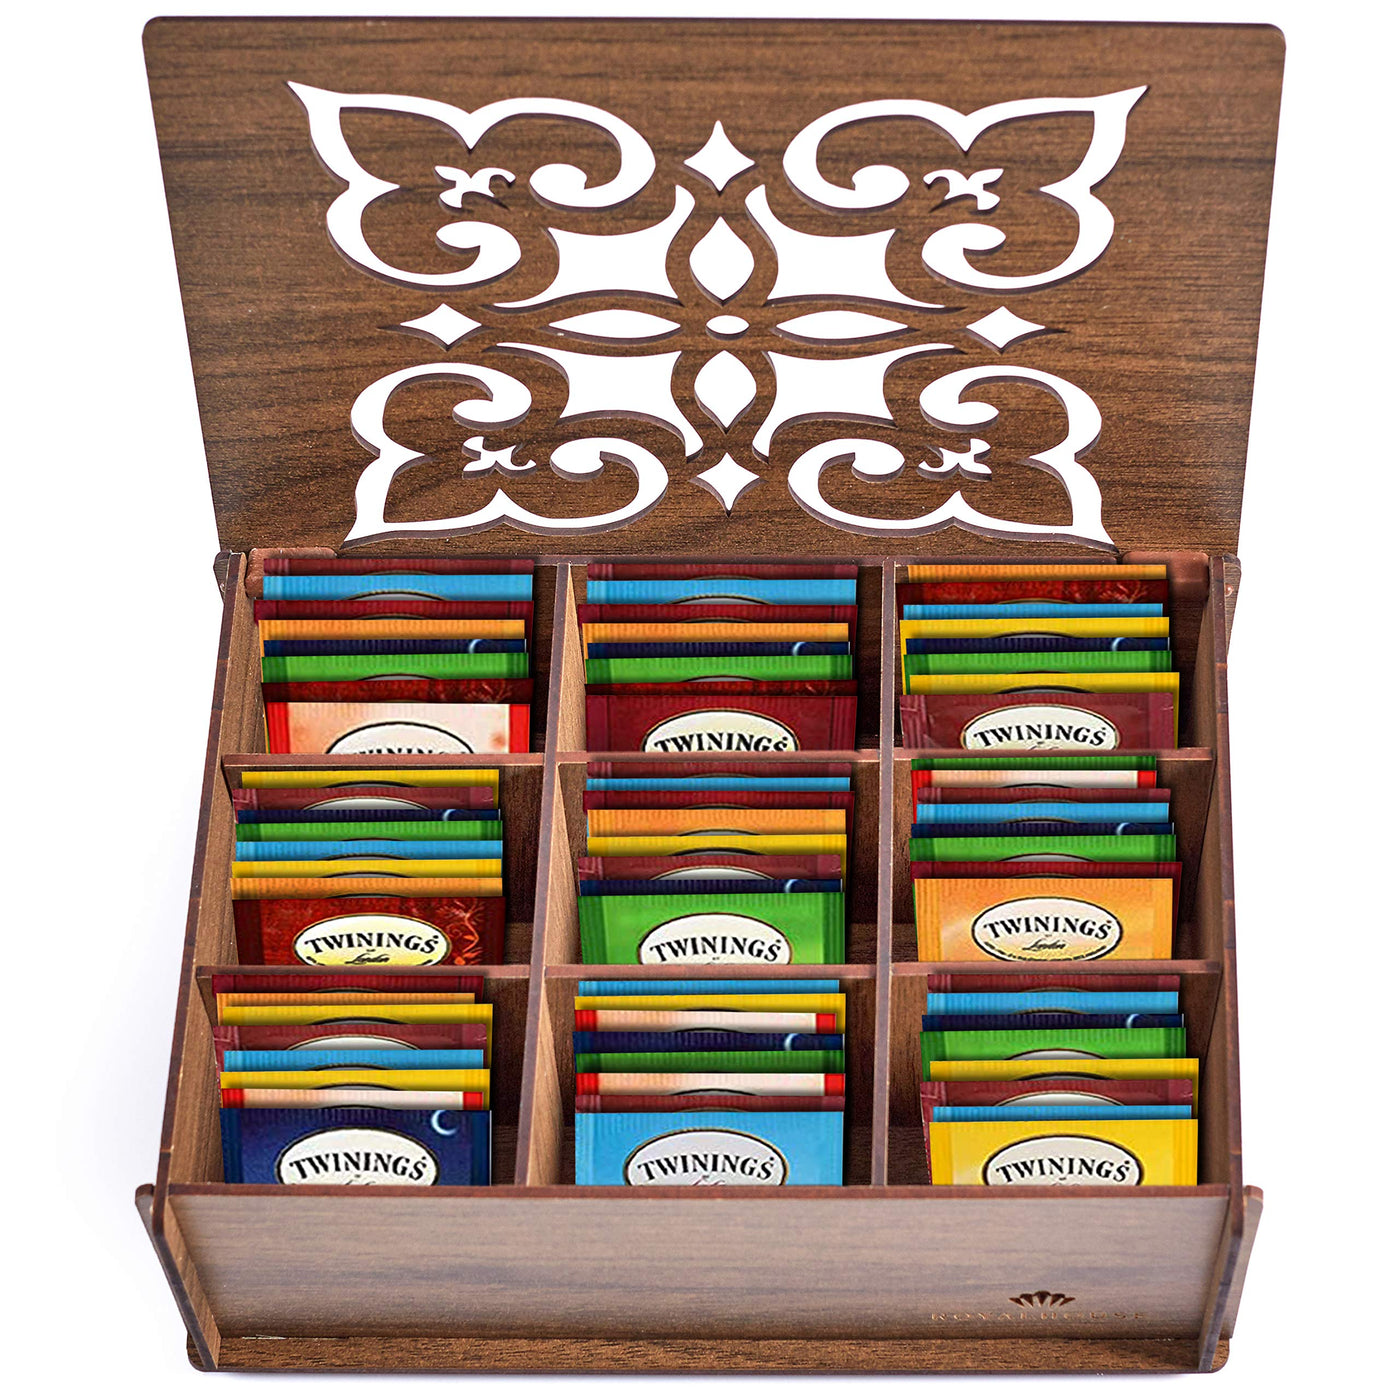 Twinings offers Premium Tea Blends and Classic Infusions